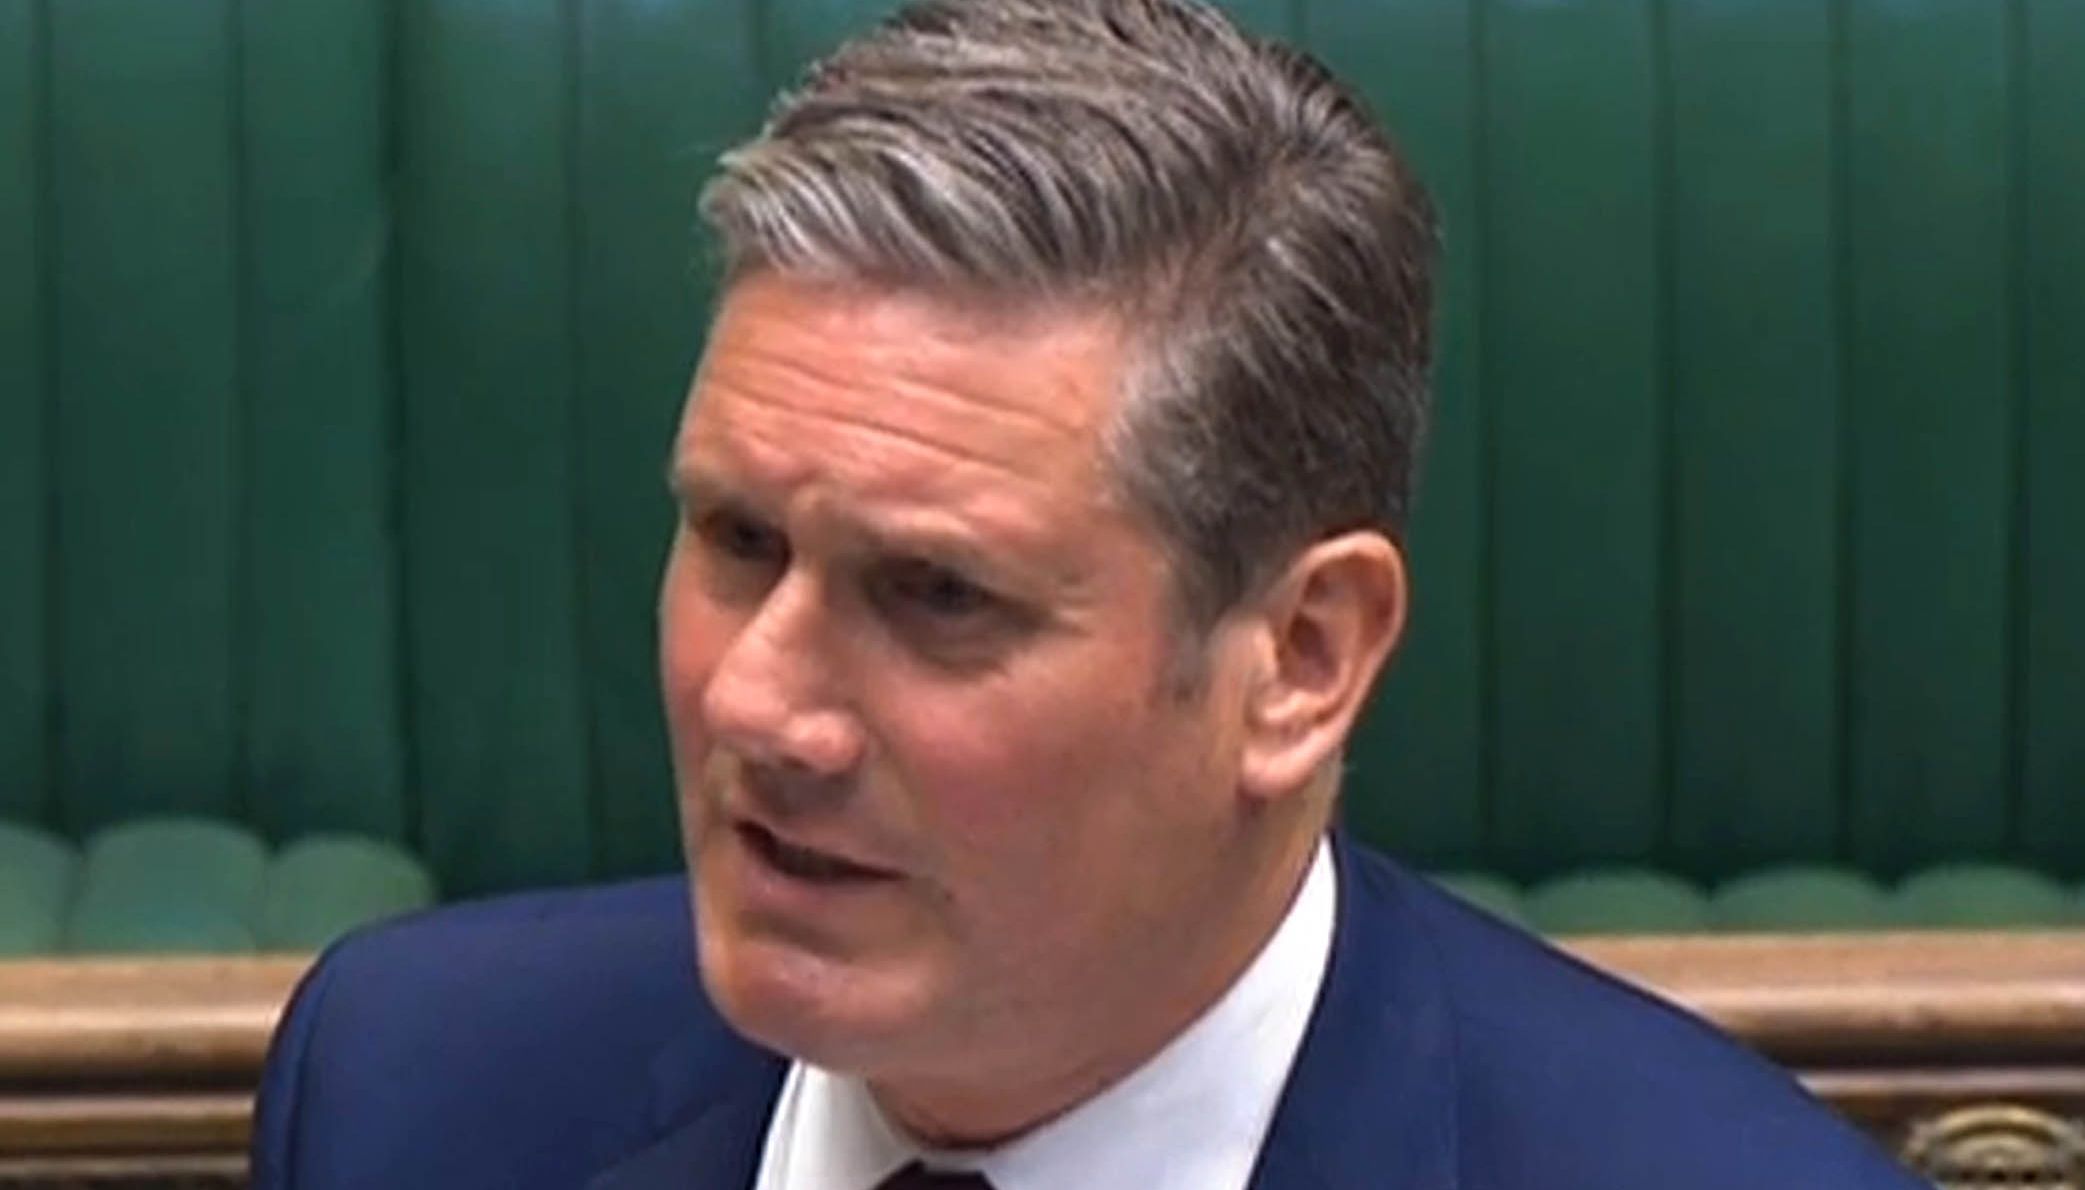 Labour Leader Keir Starmer speaks during Prime Minister's Questions in the House of Commons.